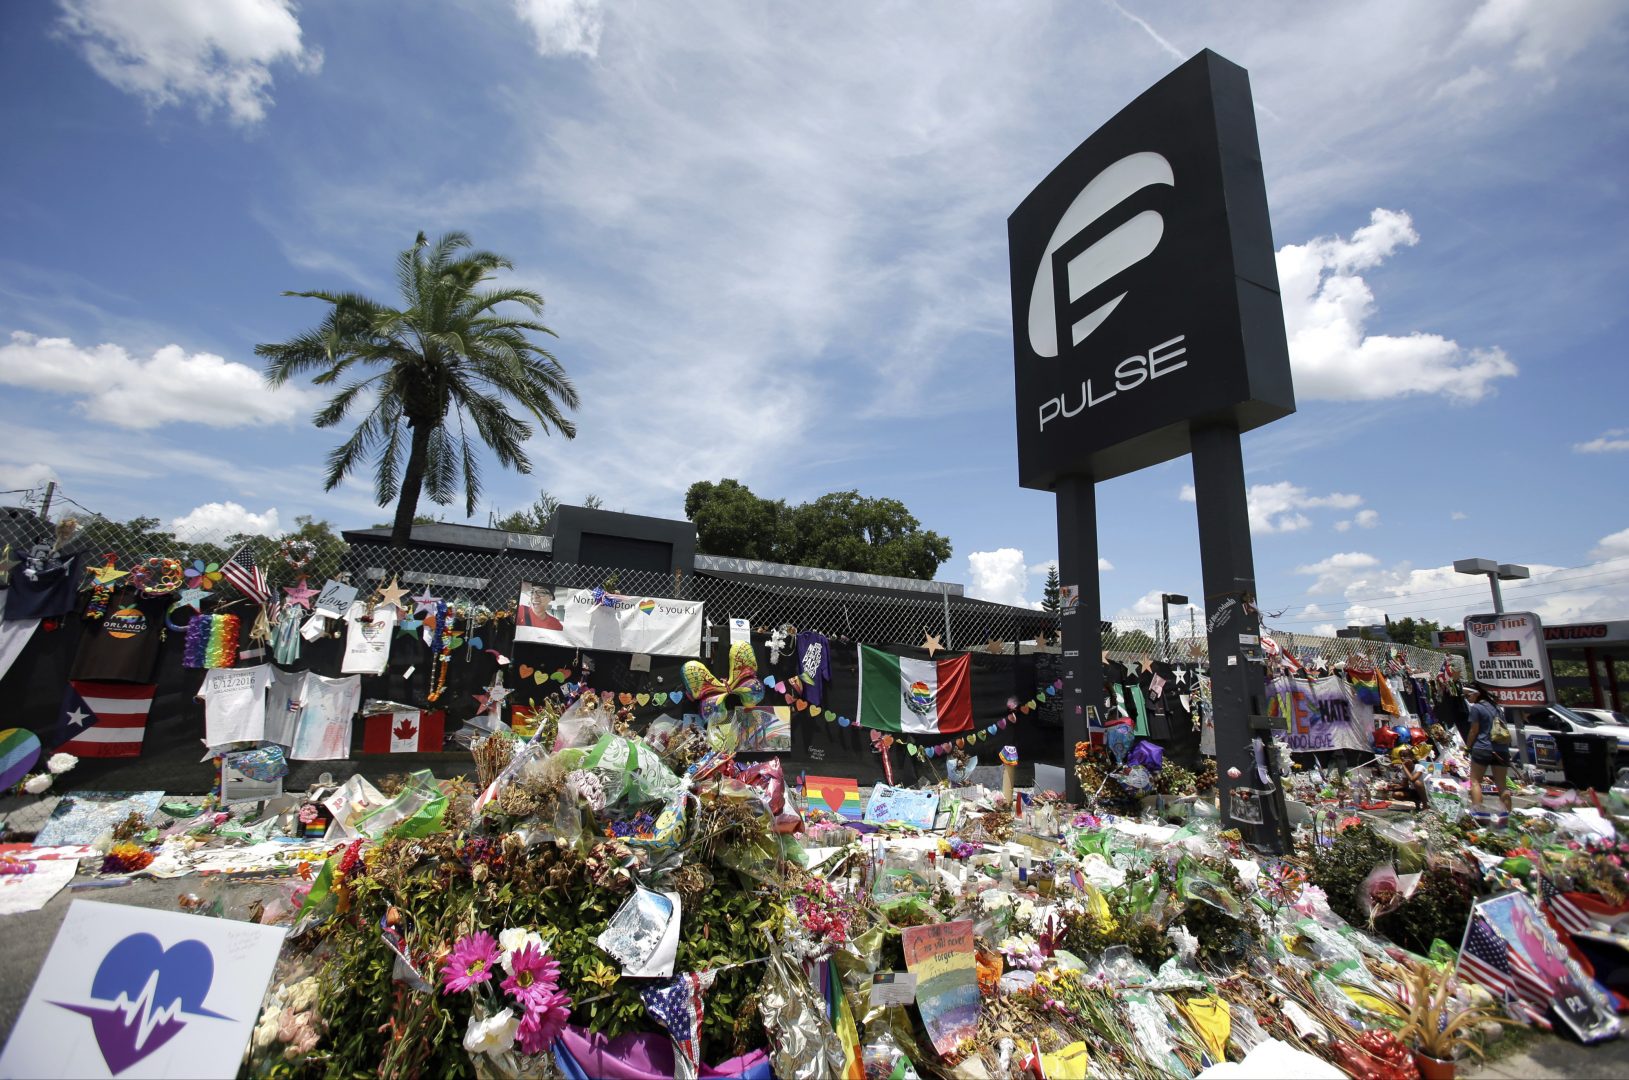 FILE PHOTO: In this July 11, 2016, file photo, a makeshift memorial continues to grow outside the Pulse nightclub in Orlando, the day before the one month anniversary of a mass shooting, in Orlando, Fla.